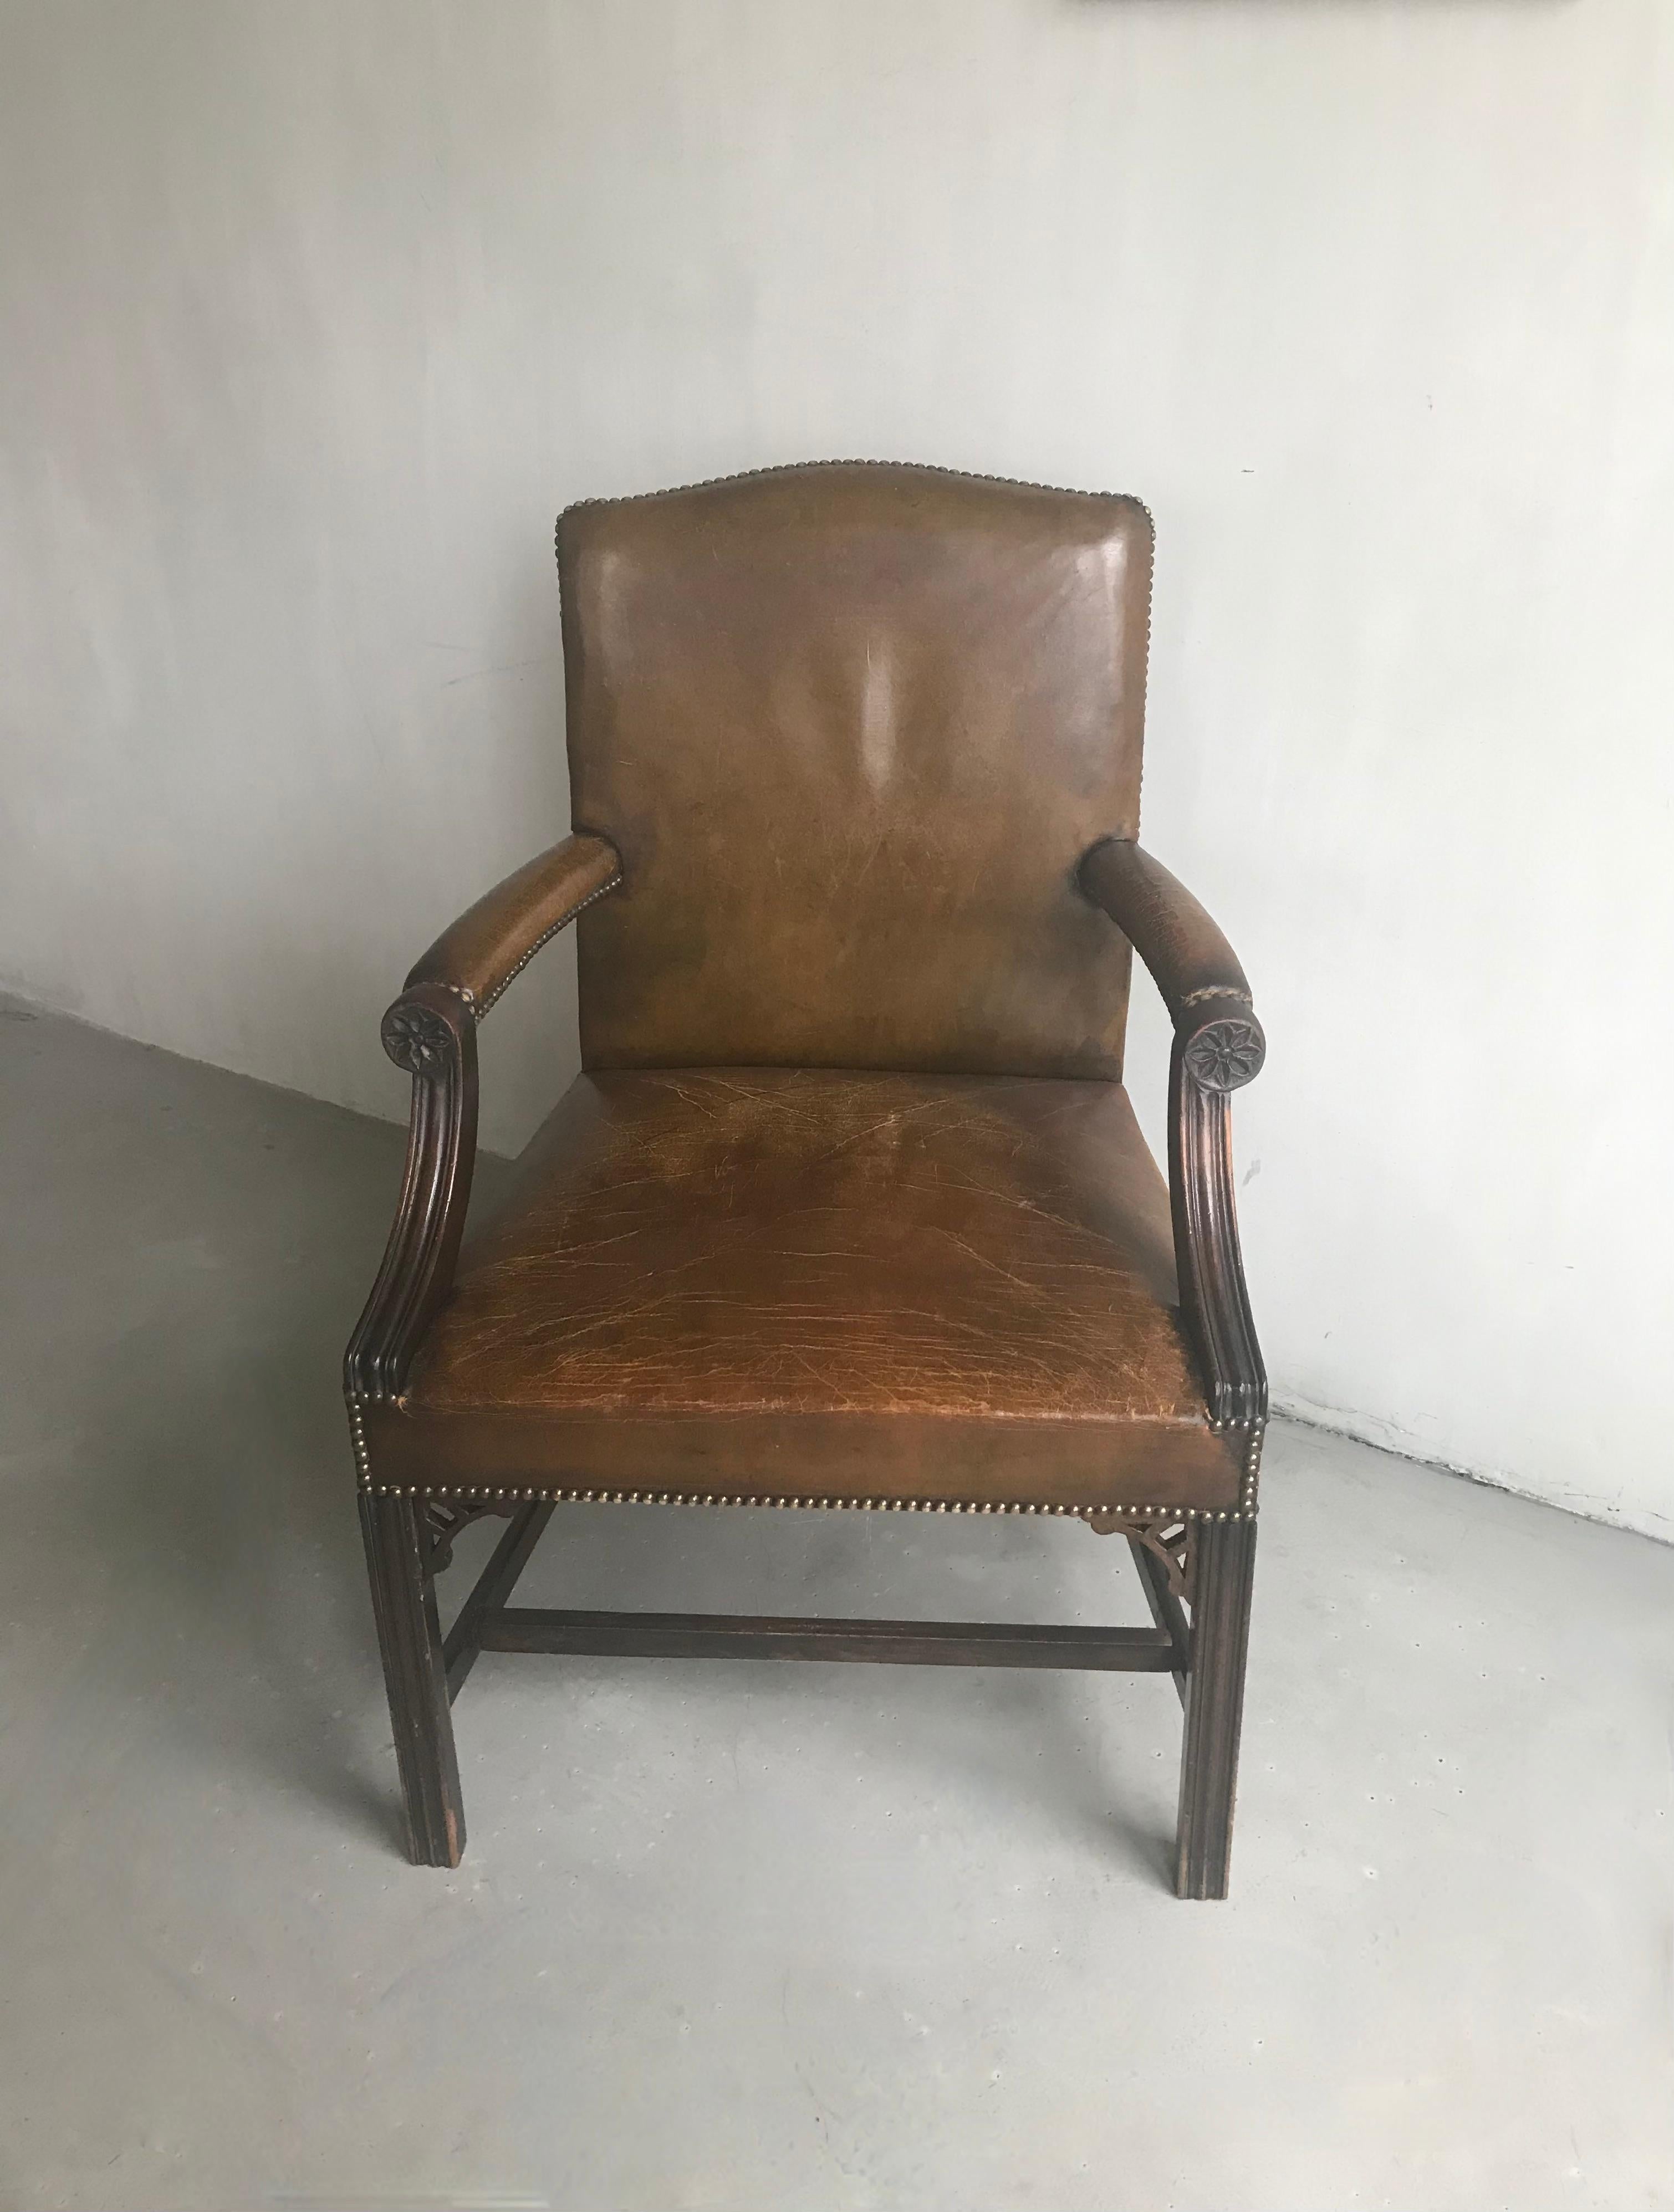 A beautiful Georgian style English armchair in leather. The leather has a beautiful patina and shows no damage, character from use.
This chair can have a wonderful place at a desk.
Base in mahogany with beautiful simplistic carving.